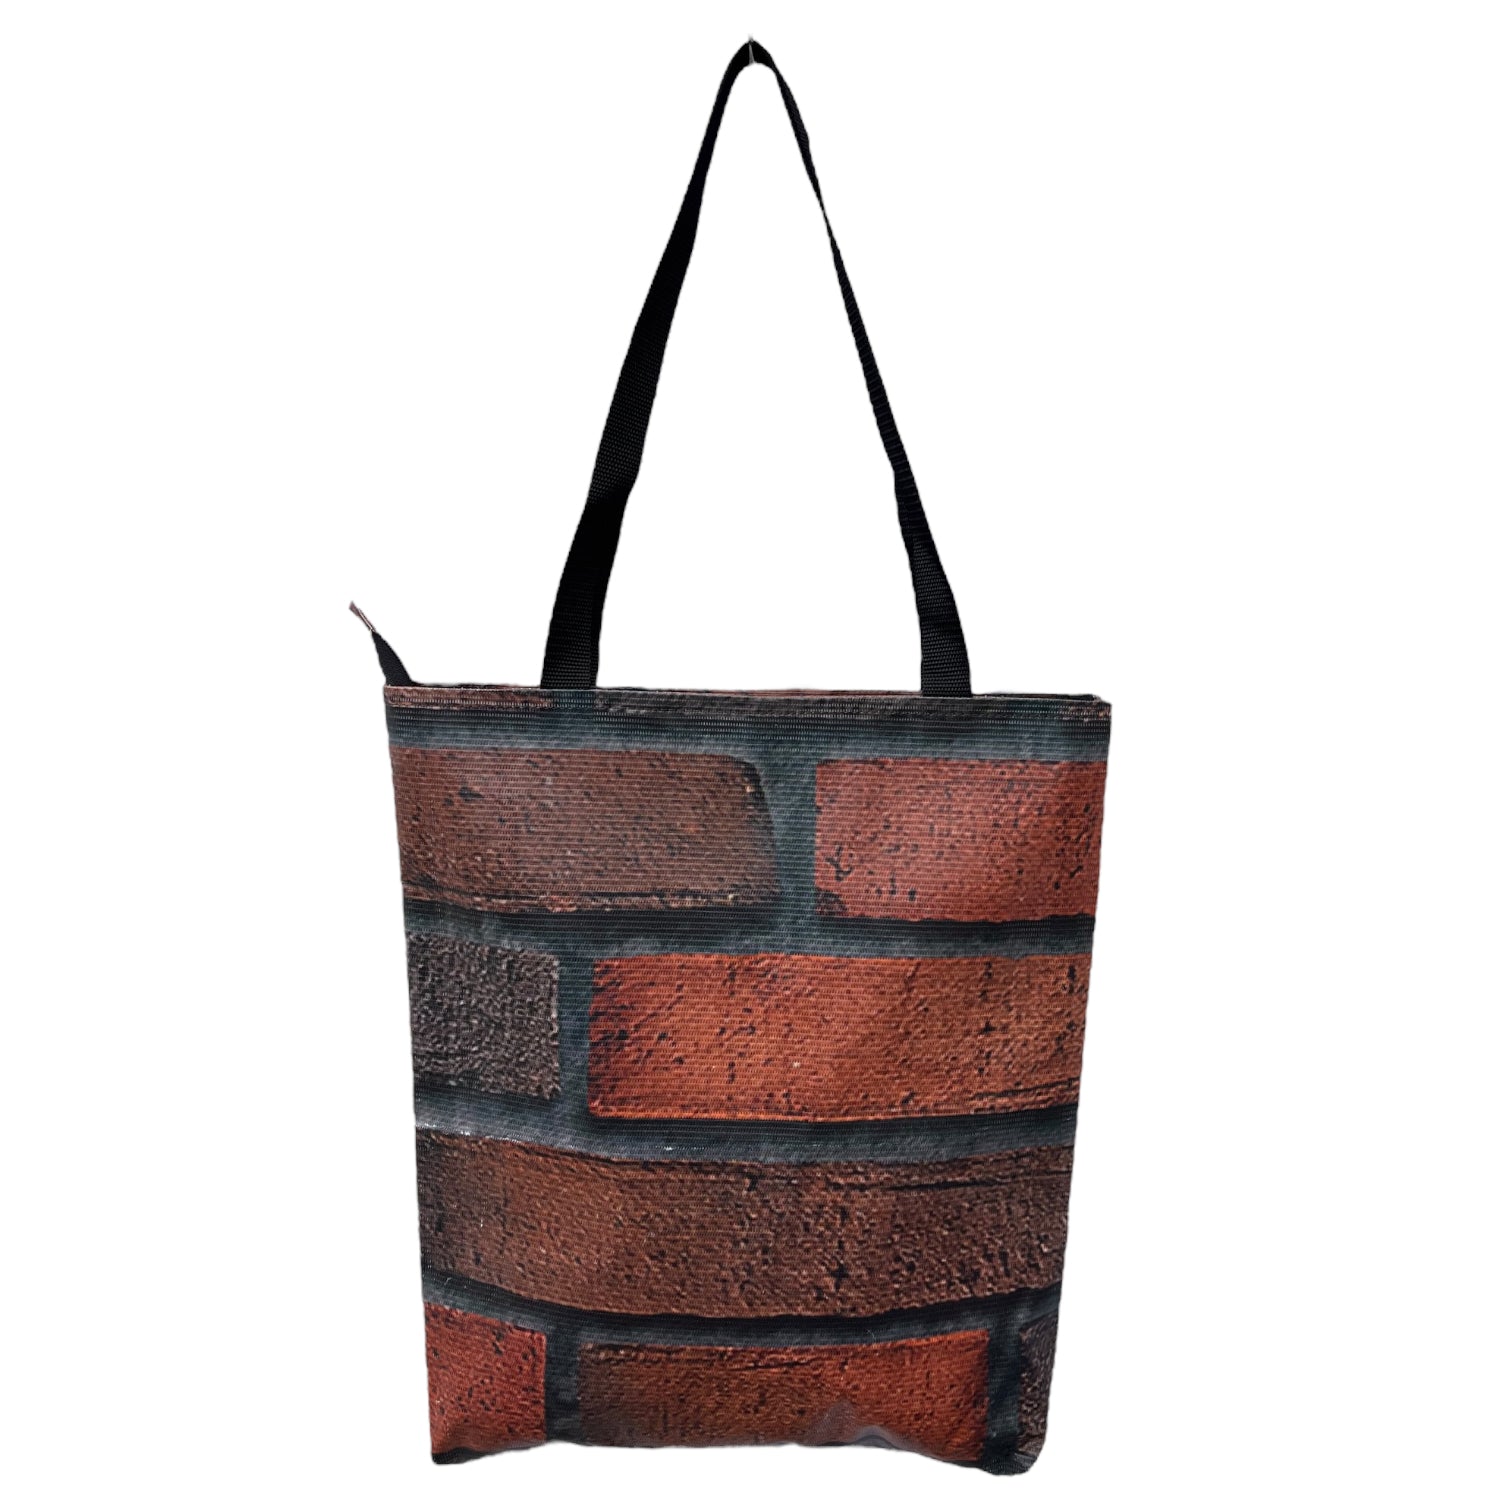 Recycled material tote bag, made of scaffold hoarding tote bag 